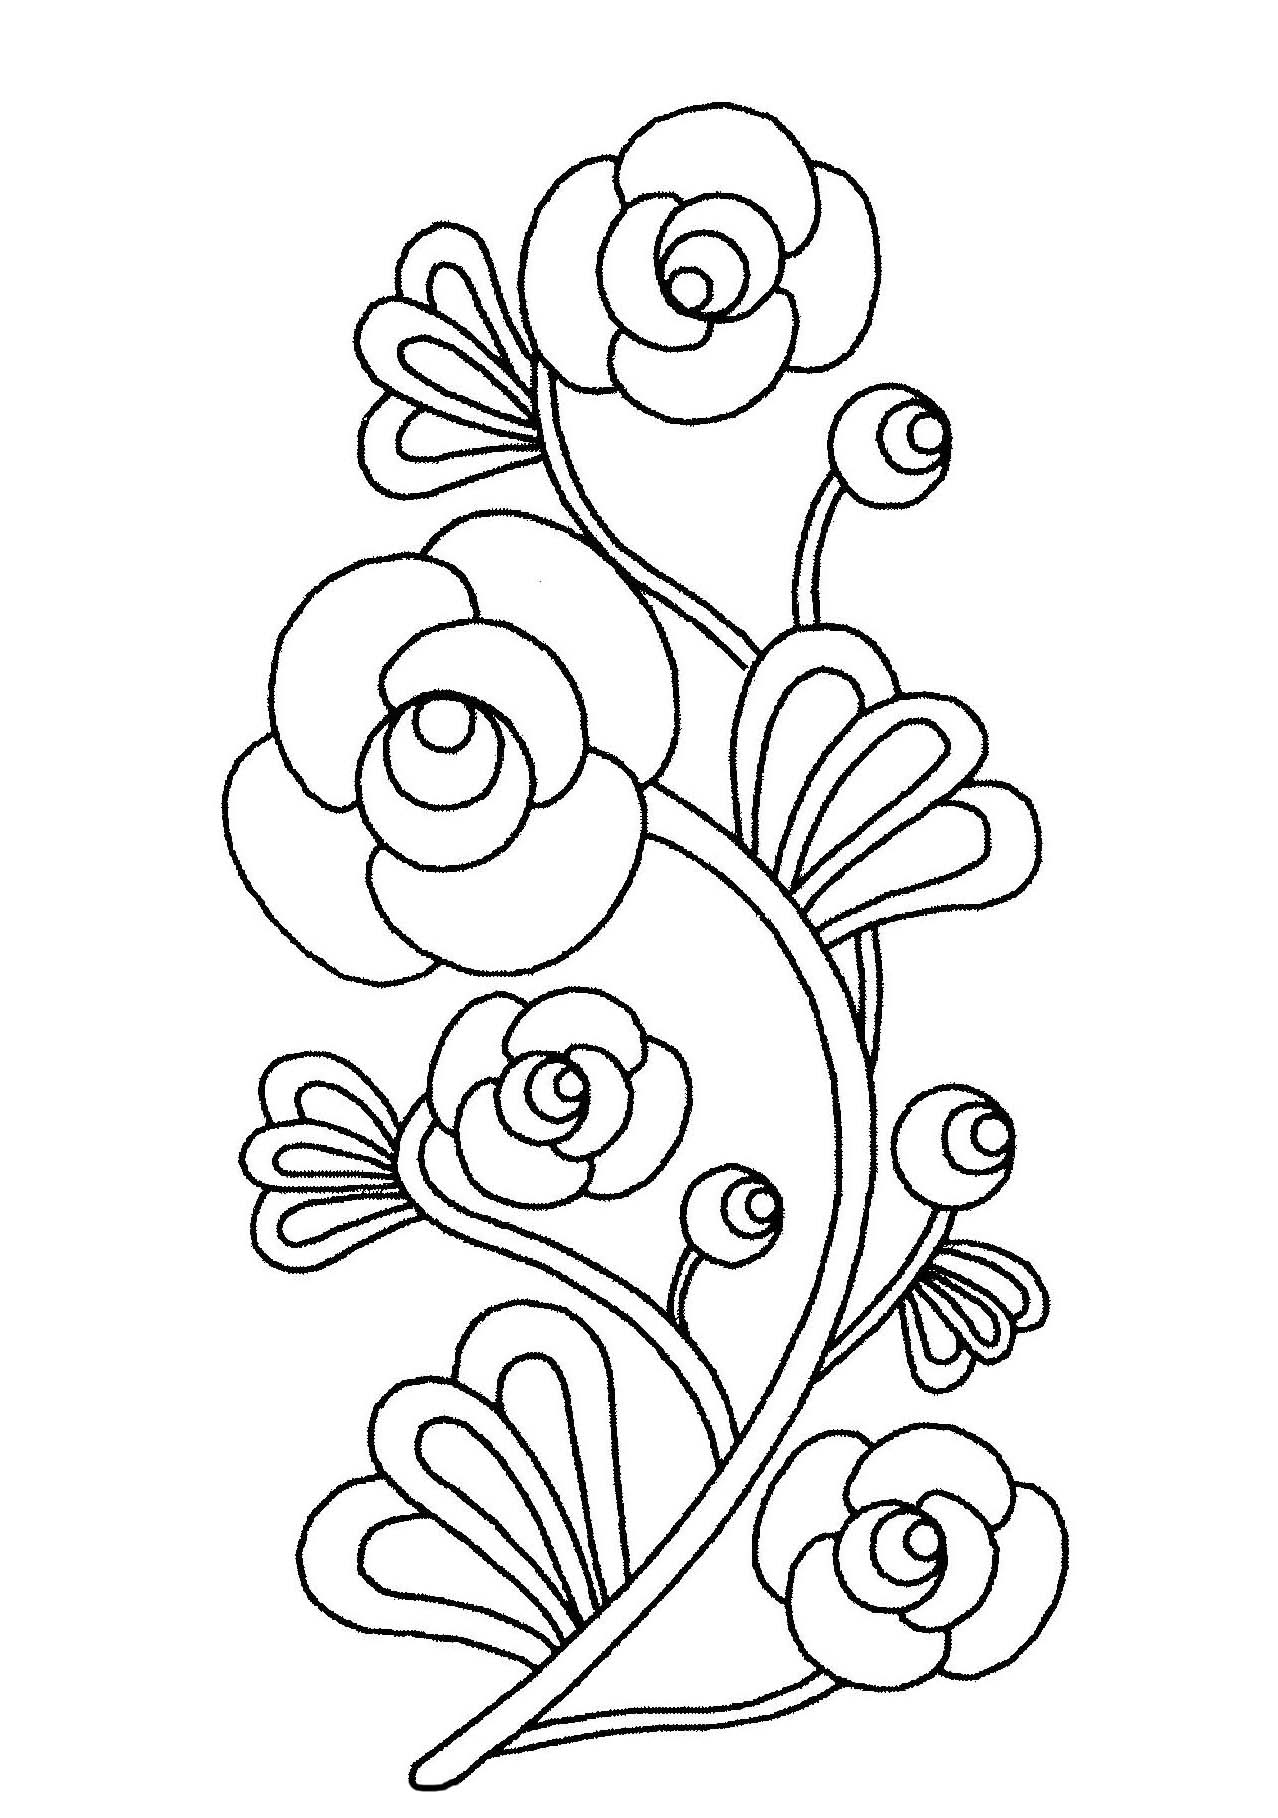 Beautiful flowers - Flowers Coloring pages for kids to ...